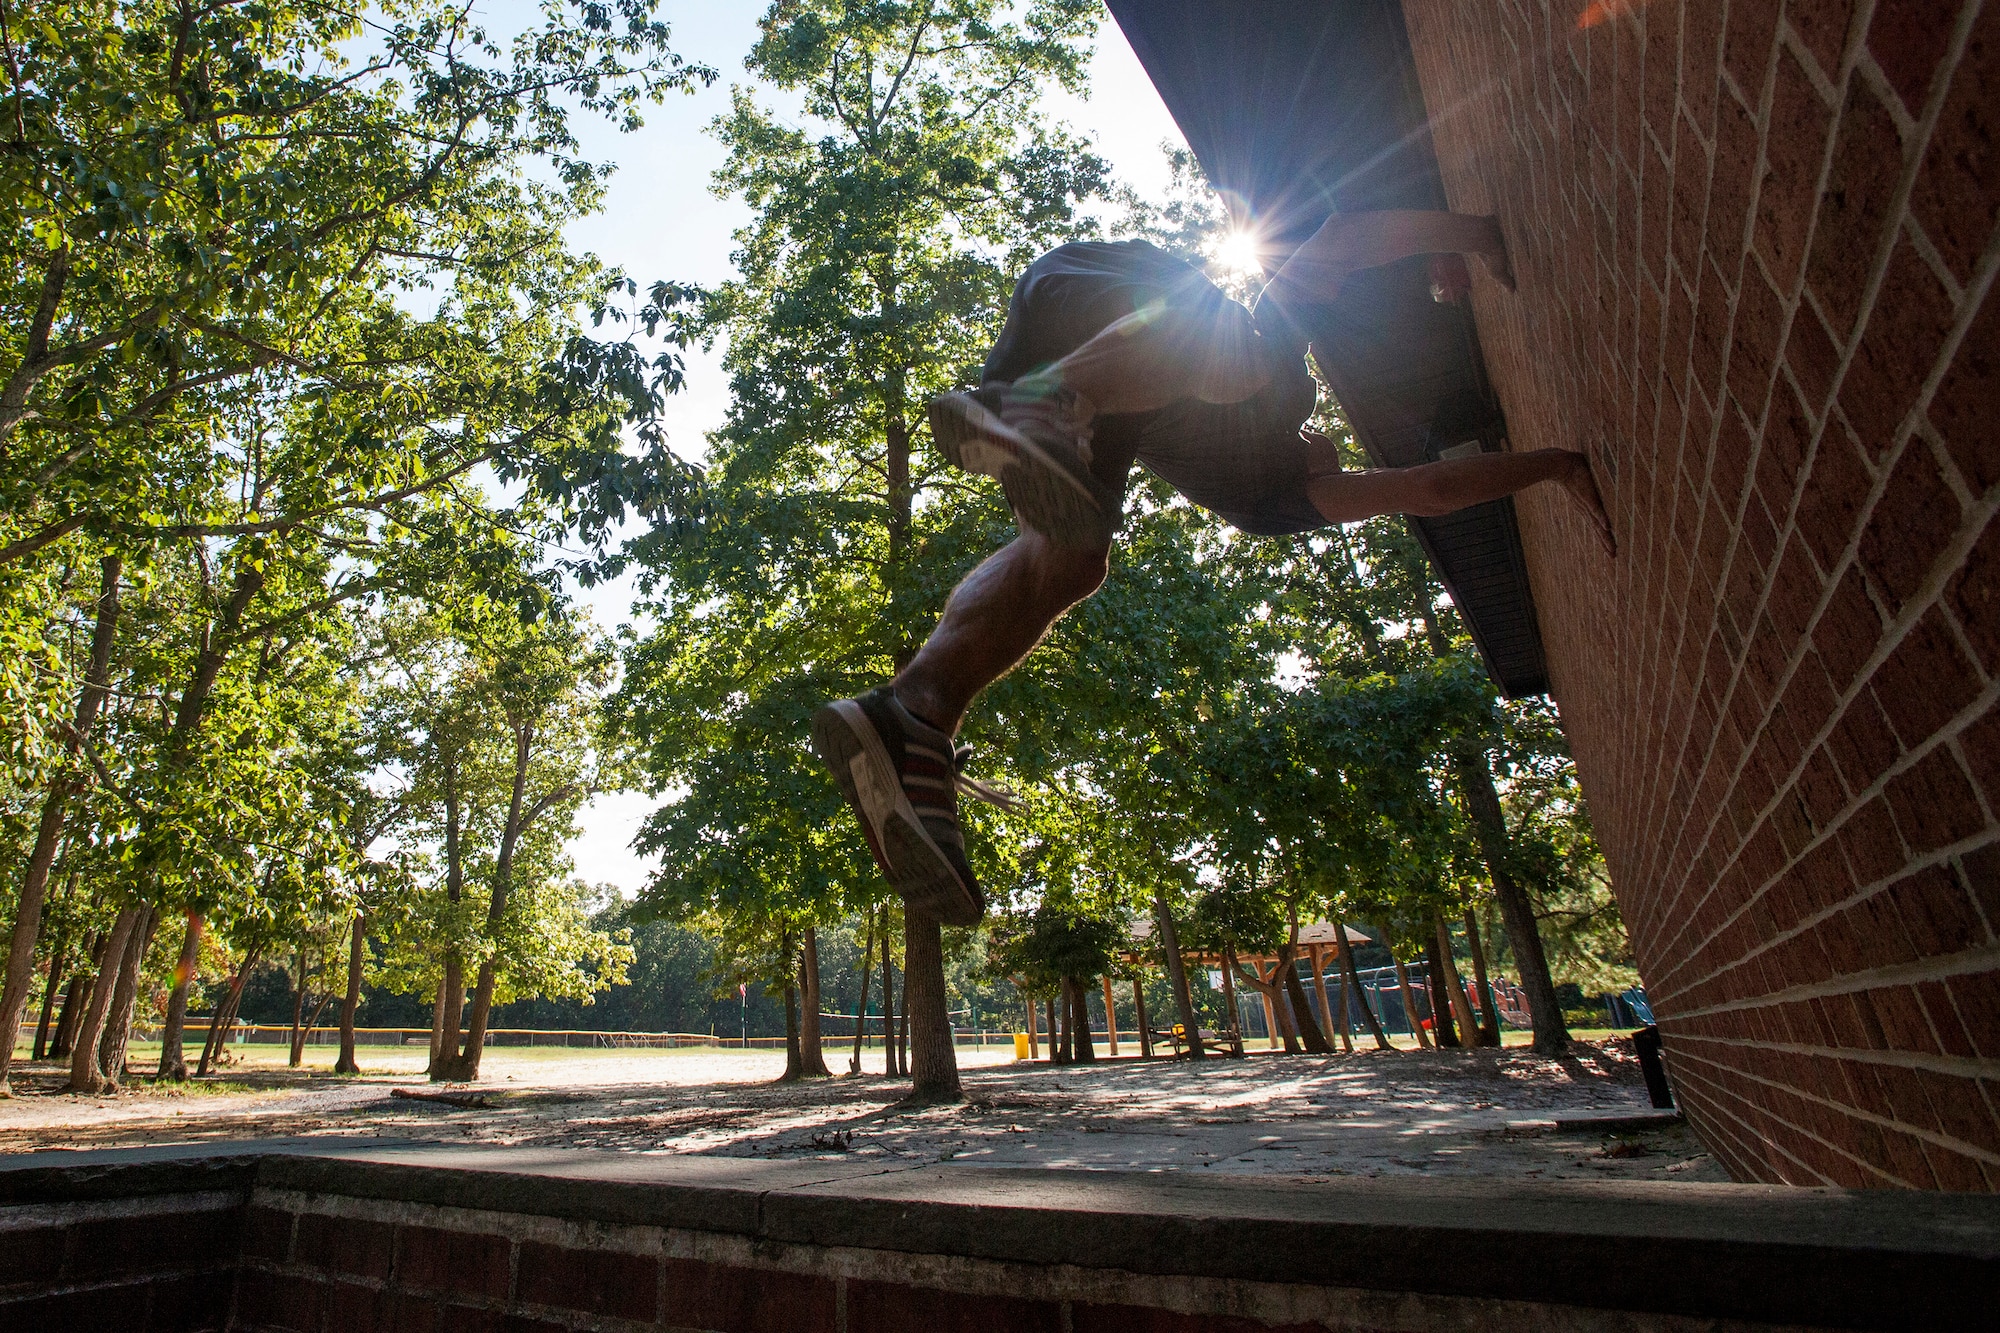 Tech. Sgt. Justin B. Gielski performs a flip on a wall while training to compete on the TV show “American Ninja Warrior” at a playground near his home in Medford, N.J., Aug. 21, 2015. Gielski placed fifth in the all-military city final on the TV show and advanced to the finals in Las Vegas. Gielski is a loadmaster with the 150th Special Operations Squadron, 108th Wing, New Jersey Air National Guard, located at Joint Base McGuire-Dix-Lakehurst, N.J. (U.S. Air National Guard photo by Master Sgt. Mark C. Olsen/Released)